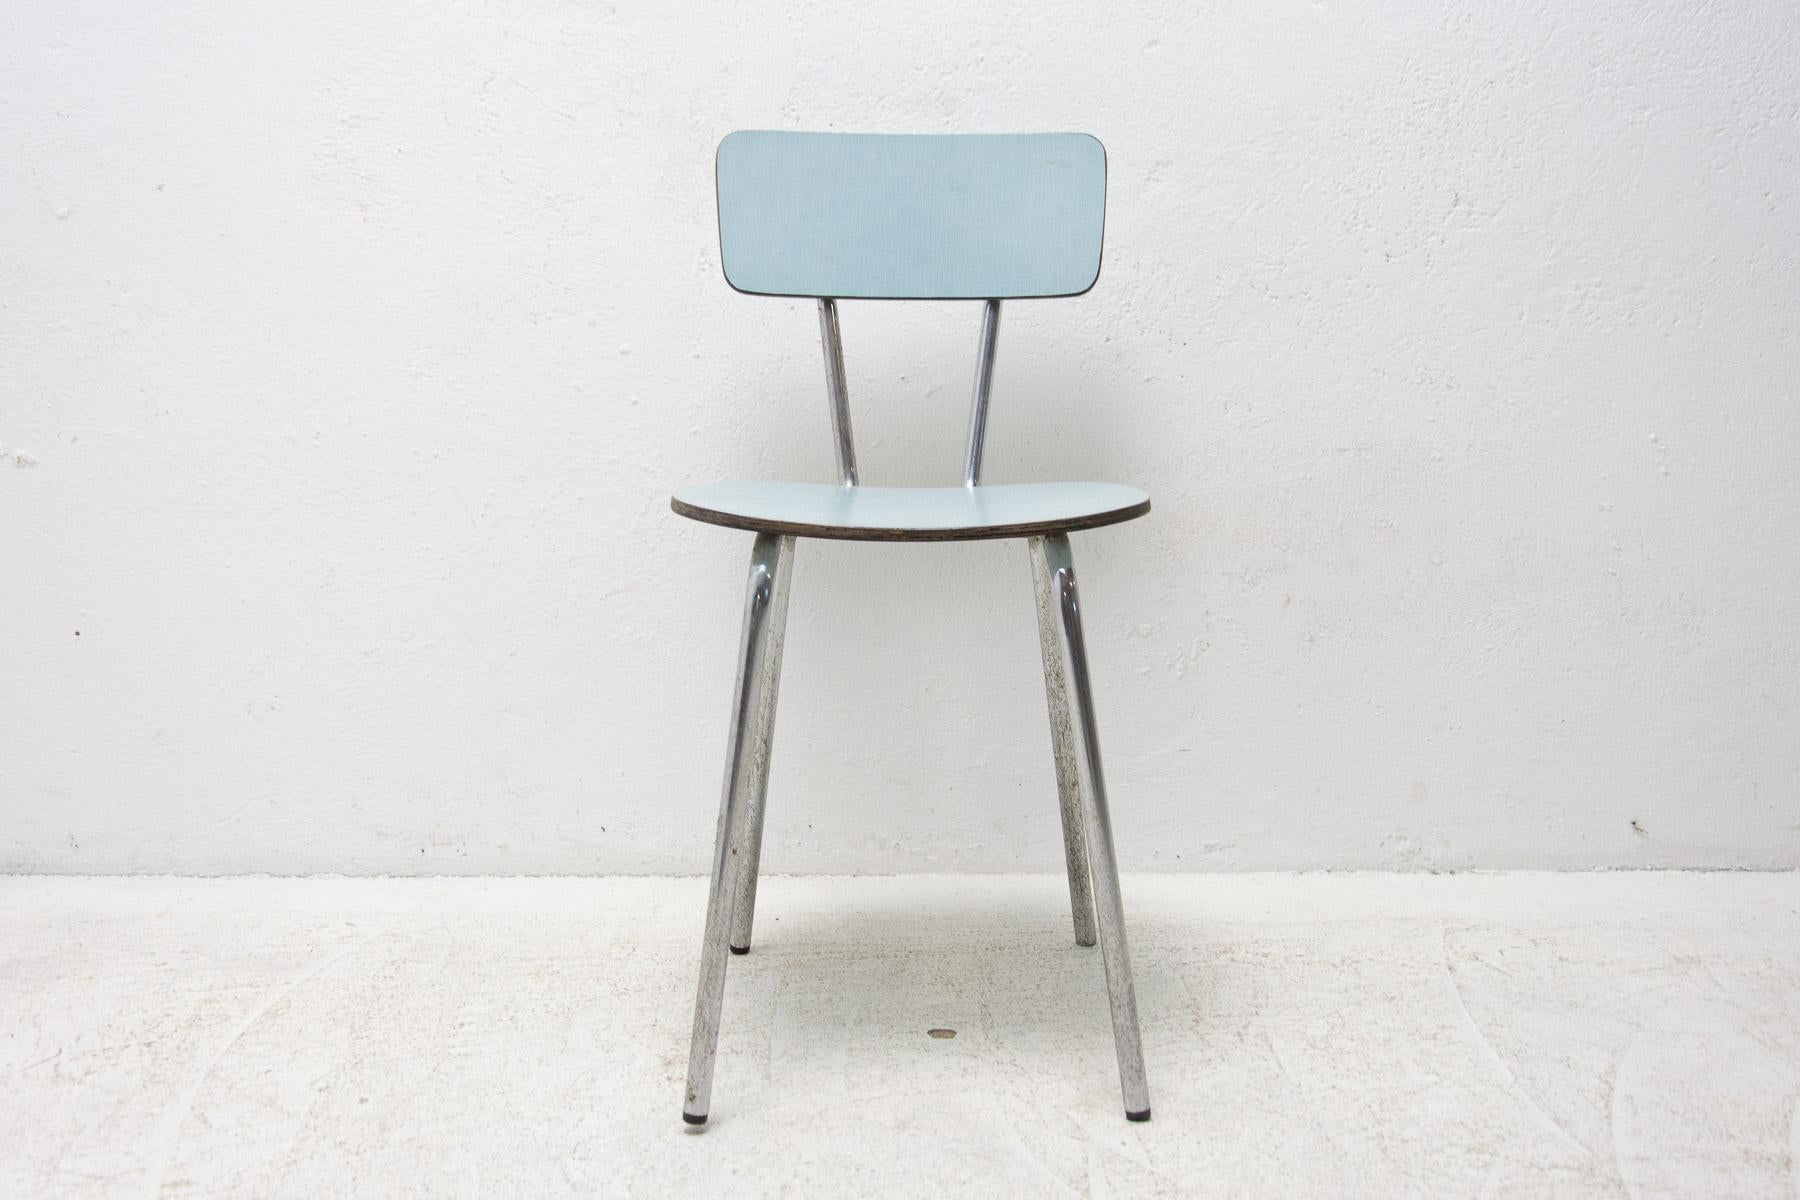 Czechoslovak Colored Formica Cafe Chair, 1960's For Sale 1